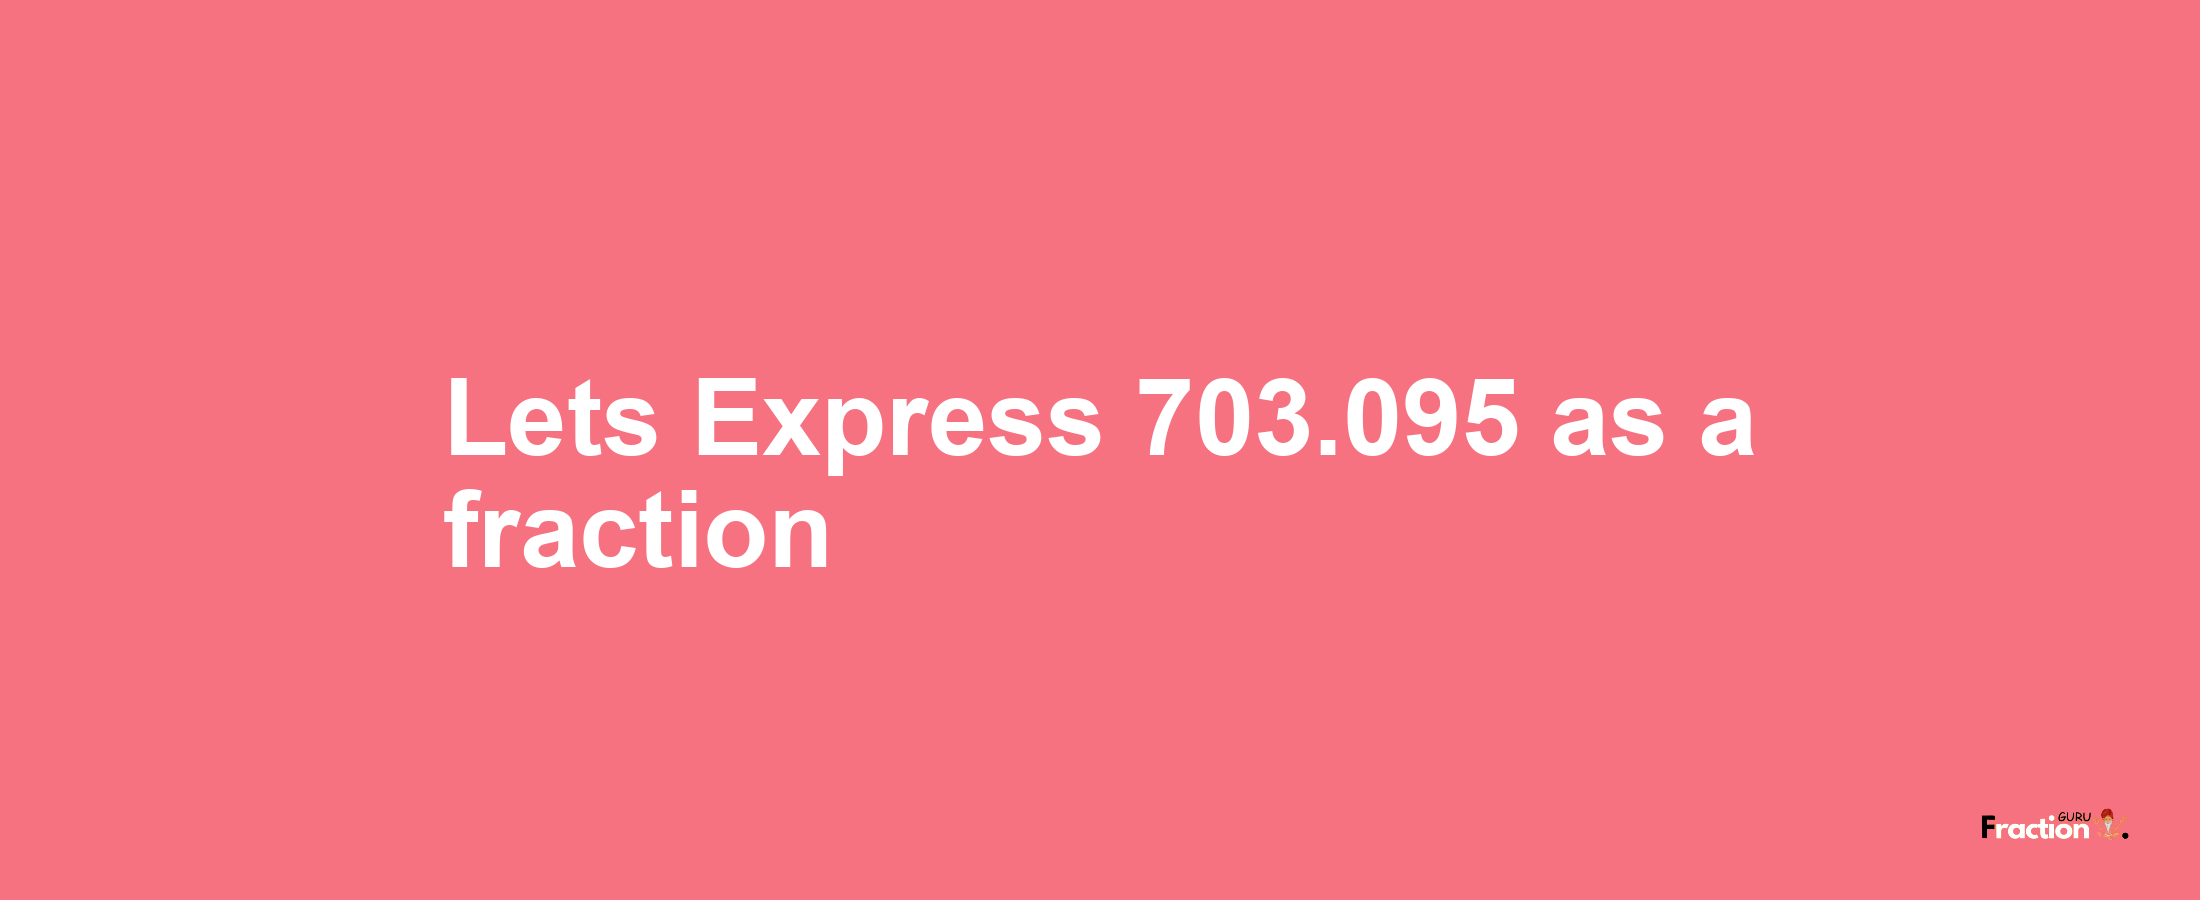 Lets Express 703.095 as afraction